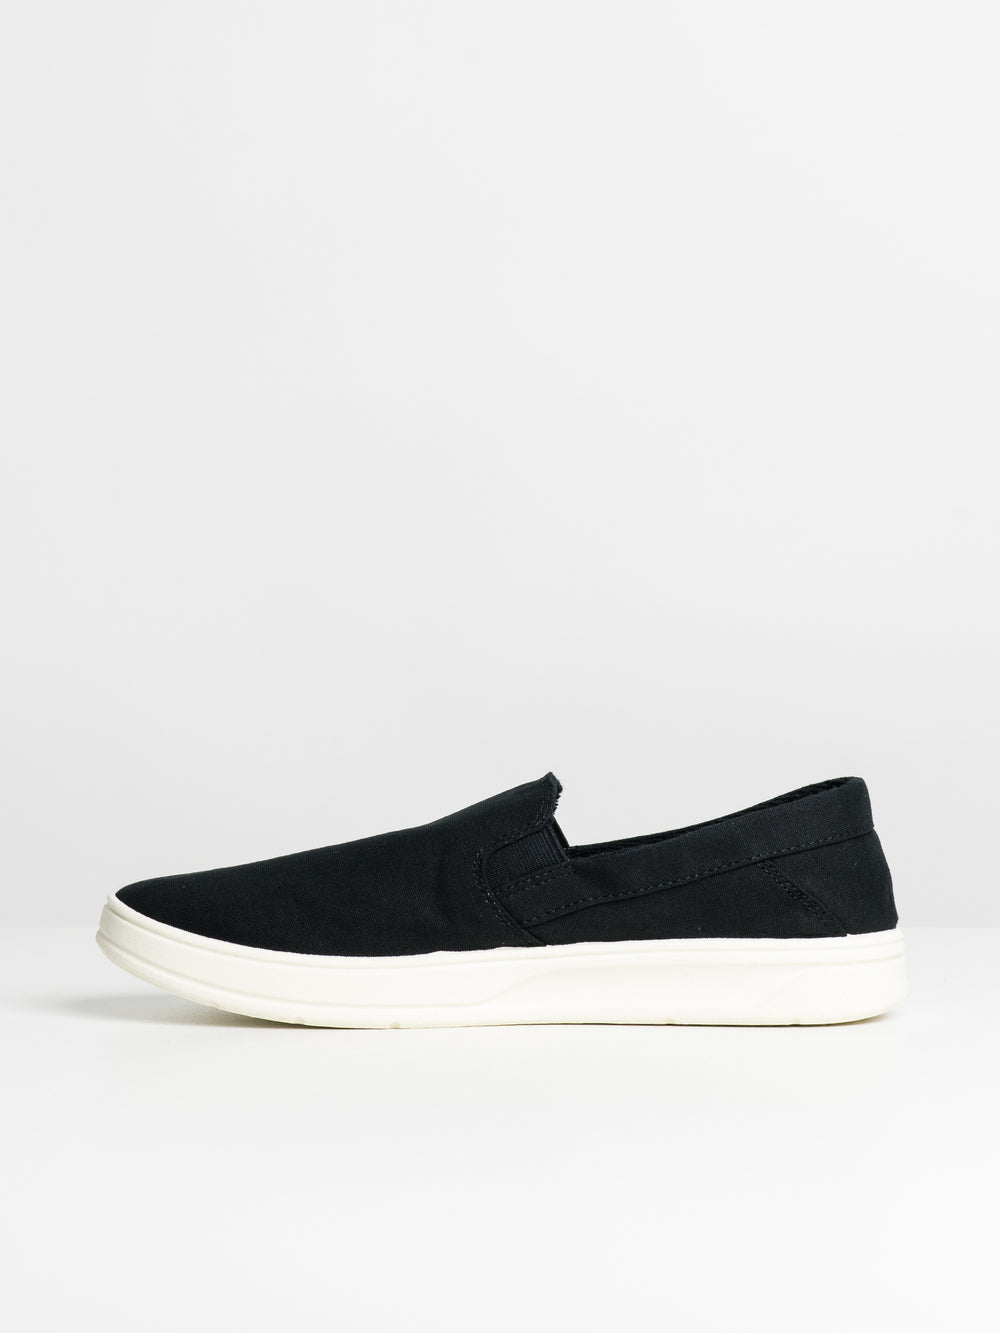 QUIKSILVER HARBOR WHARF SLIP ON MENS - CLEARANCE